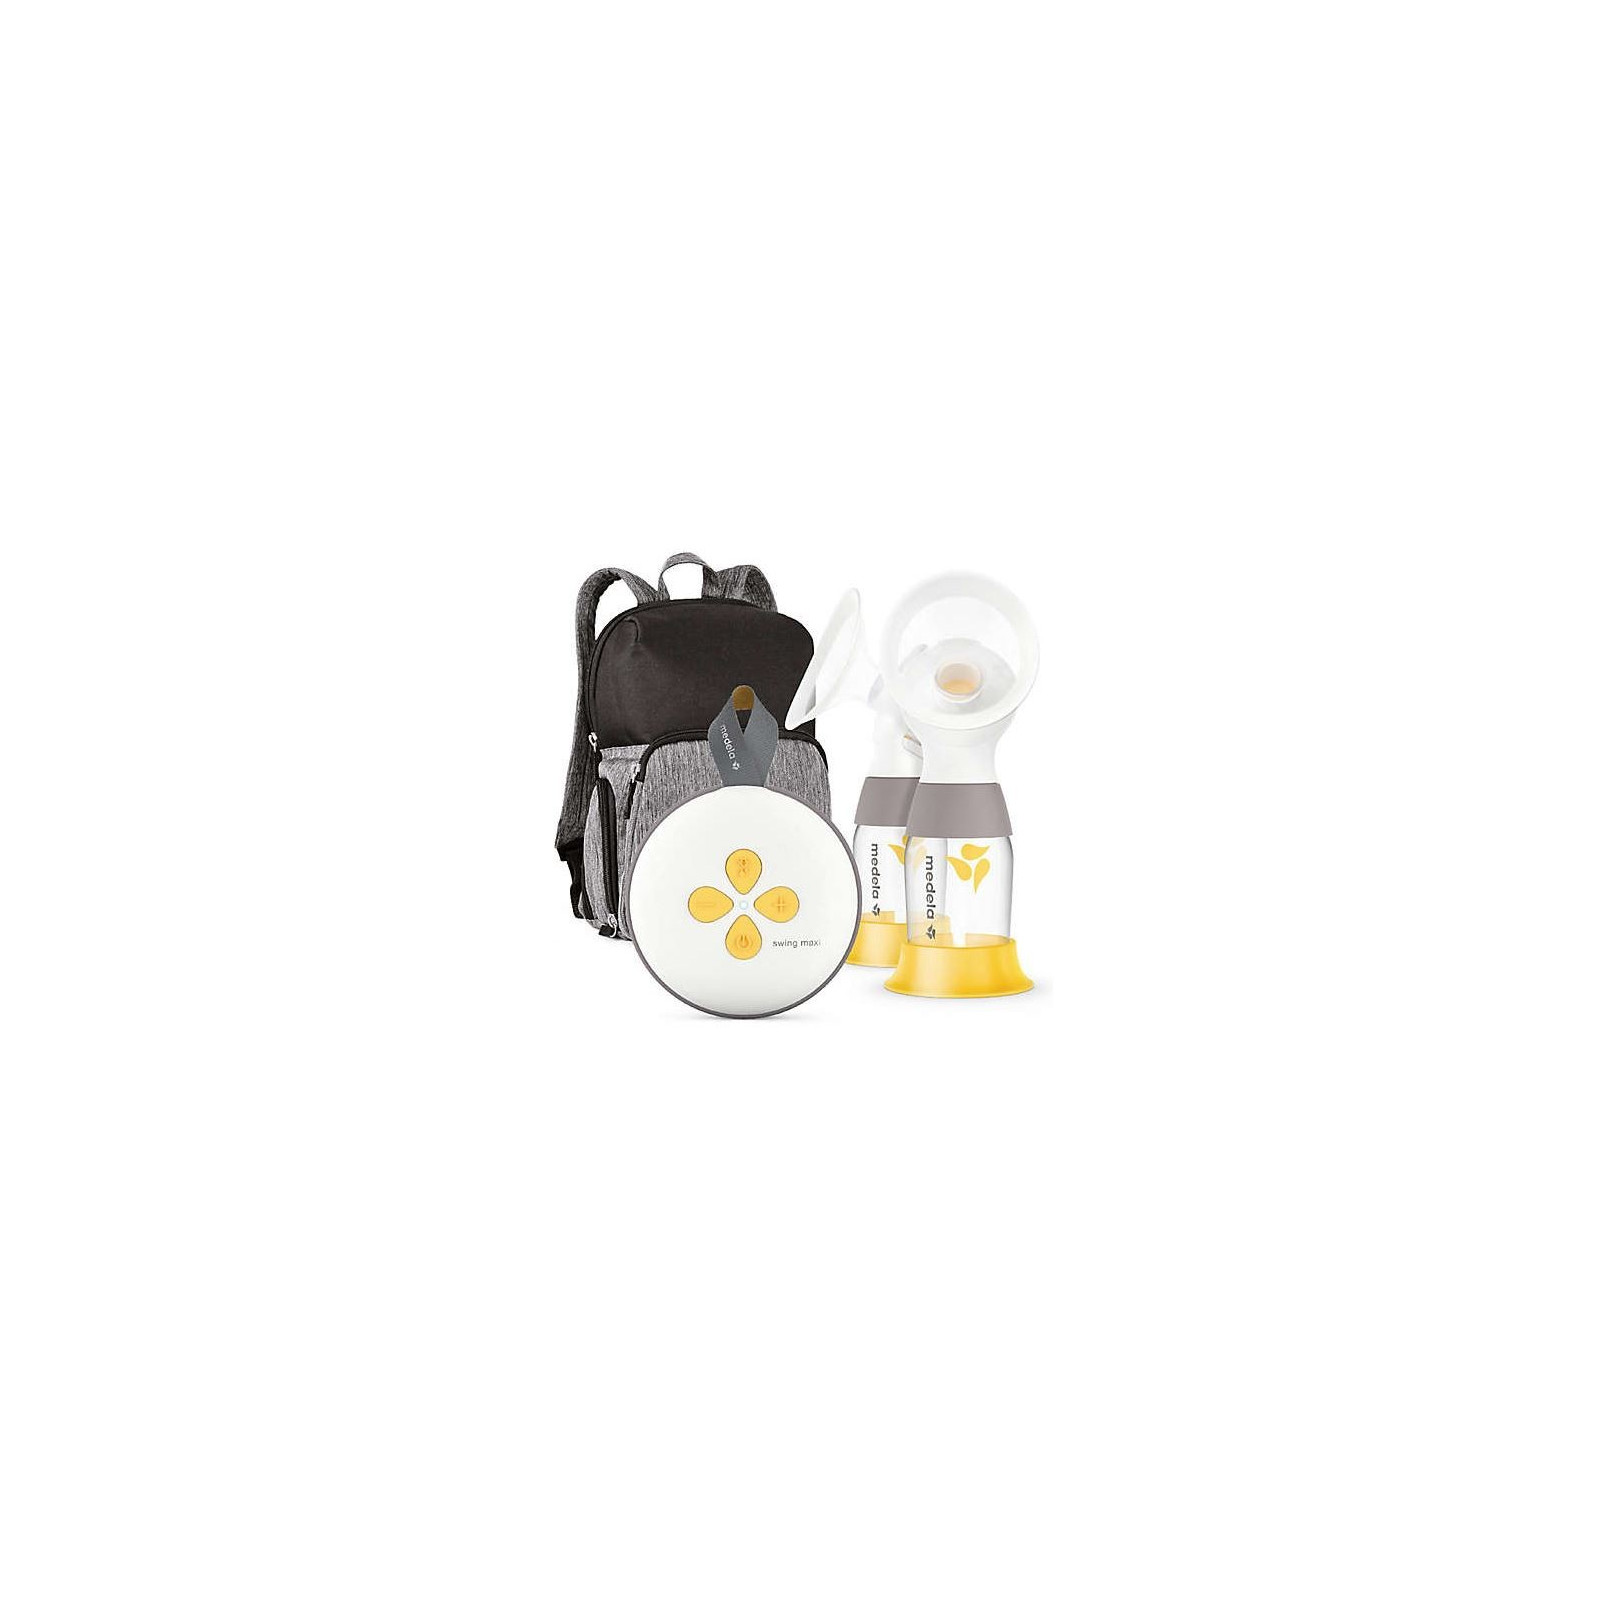 Medela Swing Maxi Double Electric Breast Pump, Portable, USB Charger,  Bluetooth